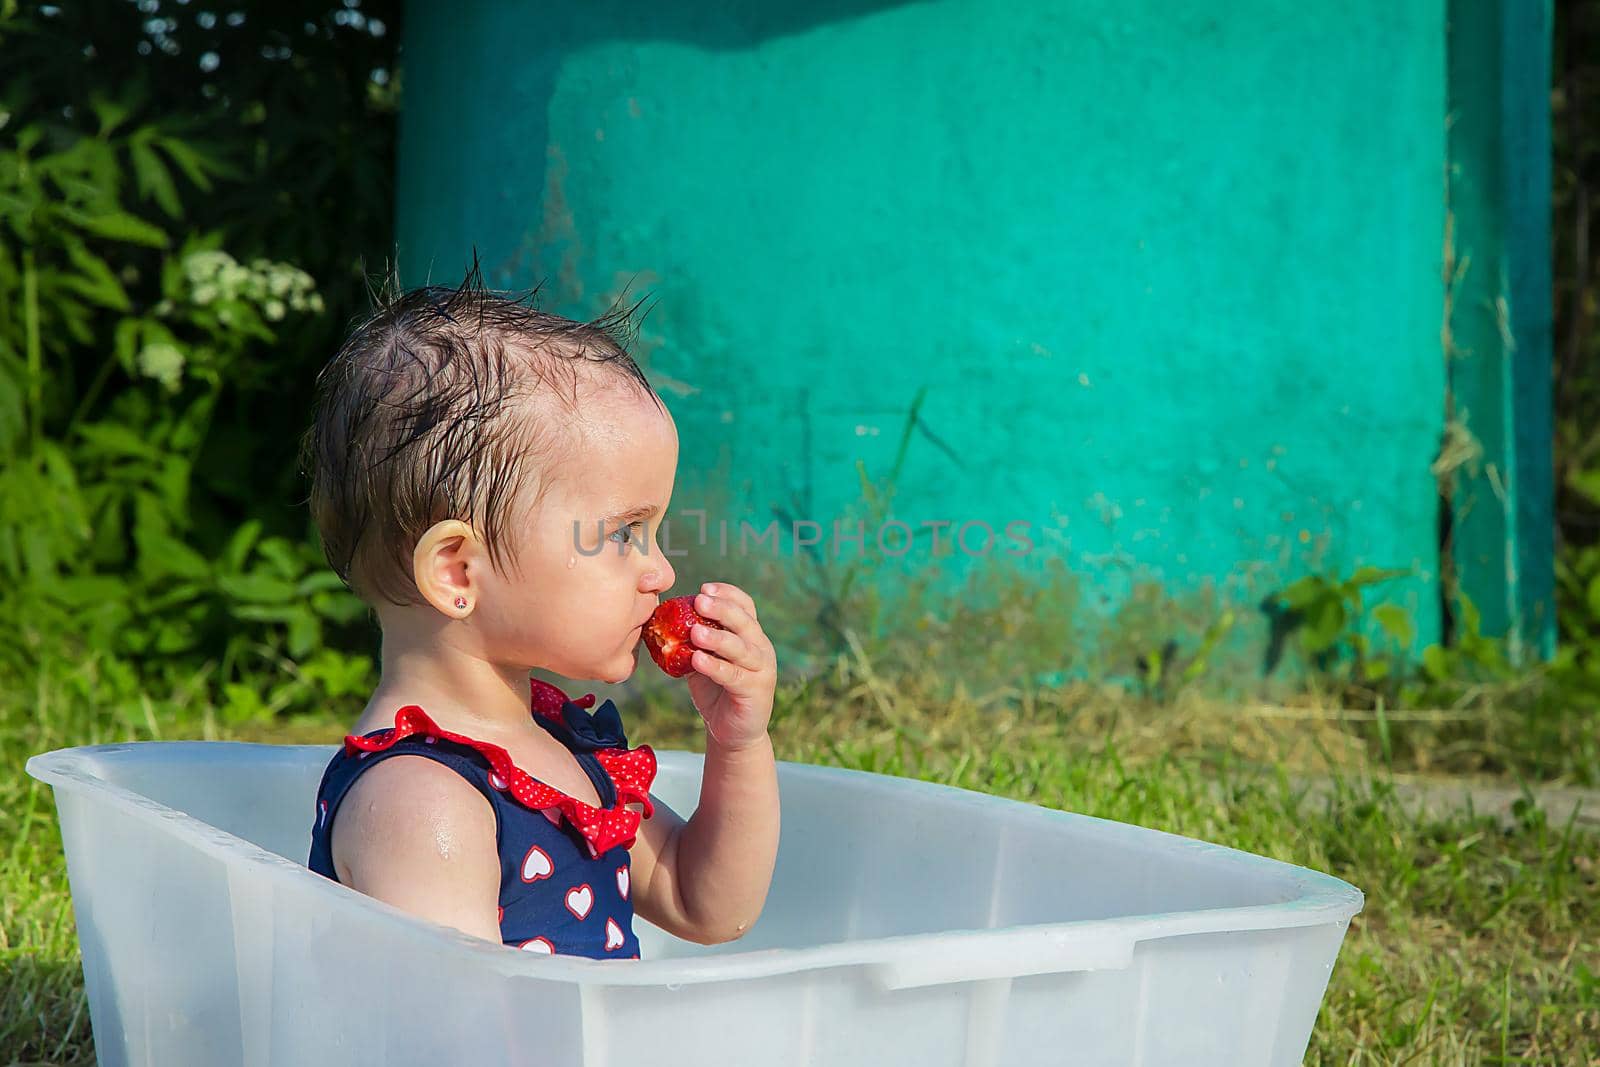 A little girl on a hot day climbed in a swimsuit in the bath and eat strawberries